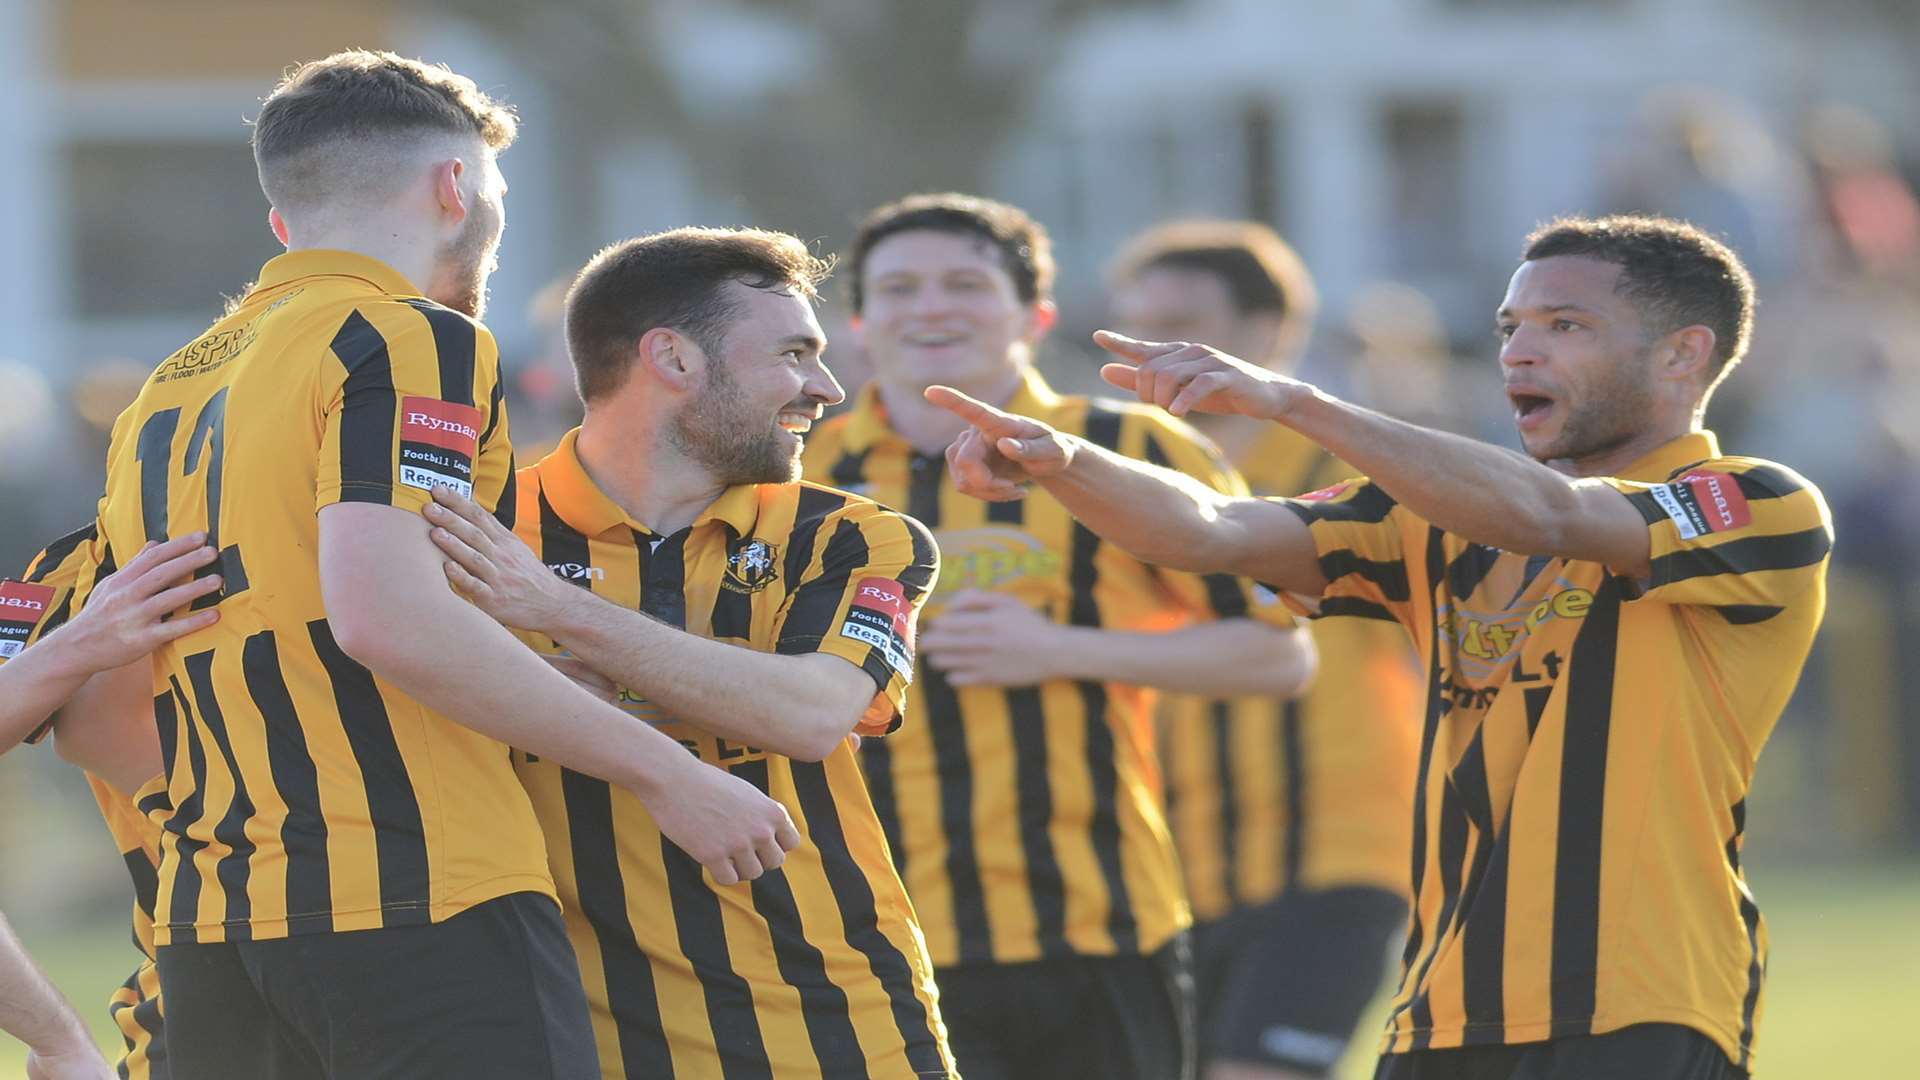 Folkestone wrapped up the league title with a 6-0 win over Walton & Hersham Picture: Gary Browne